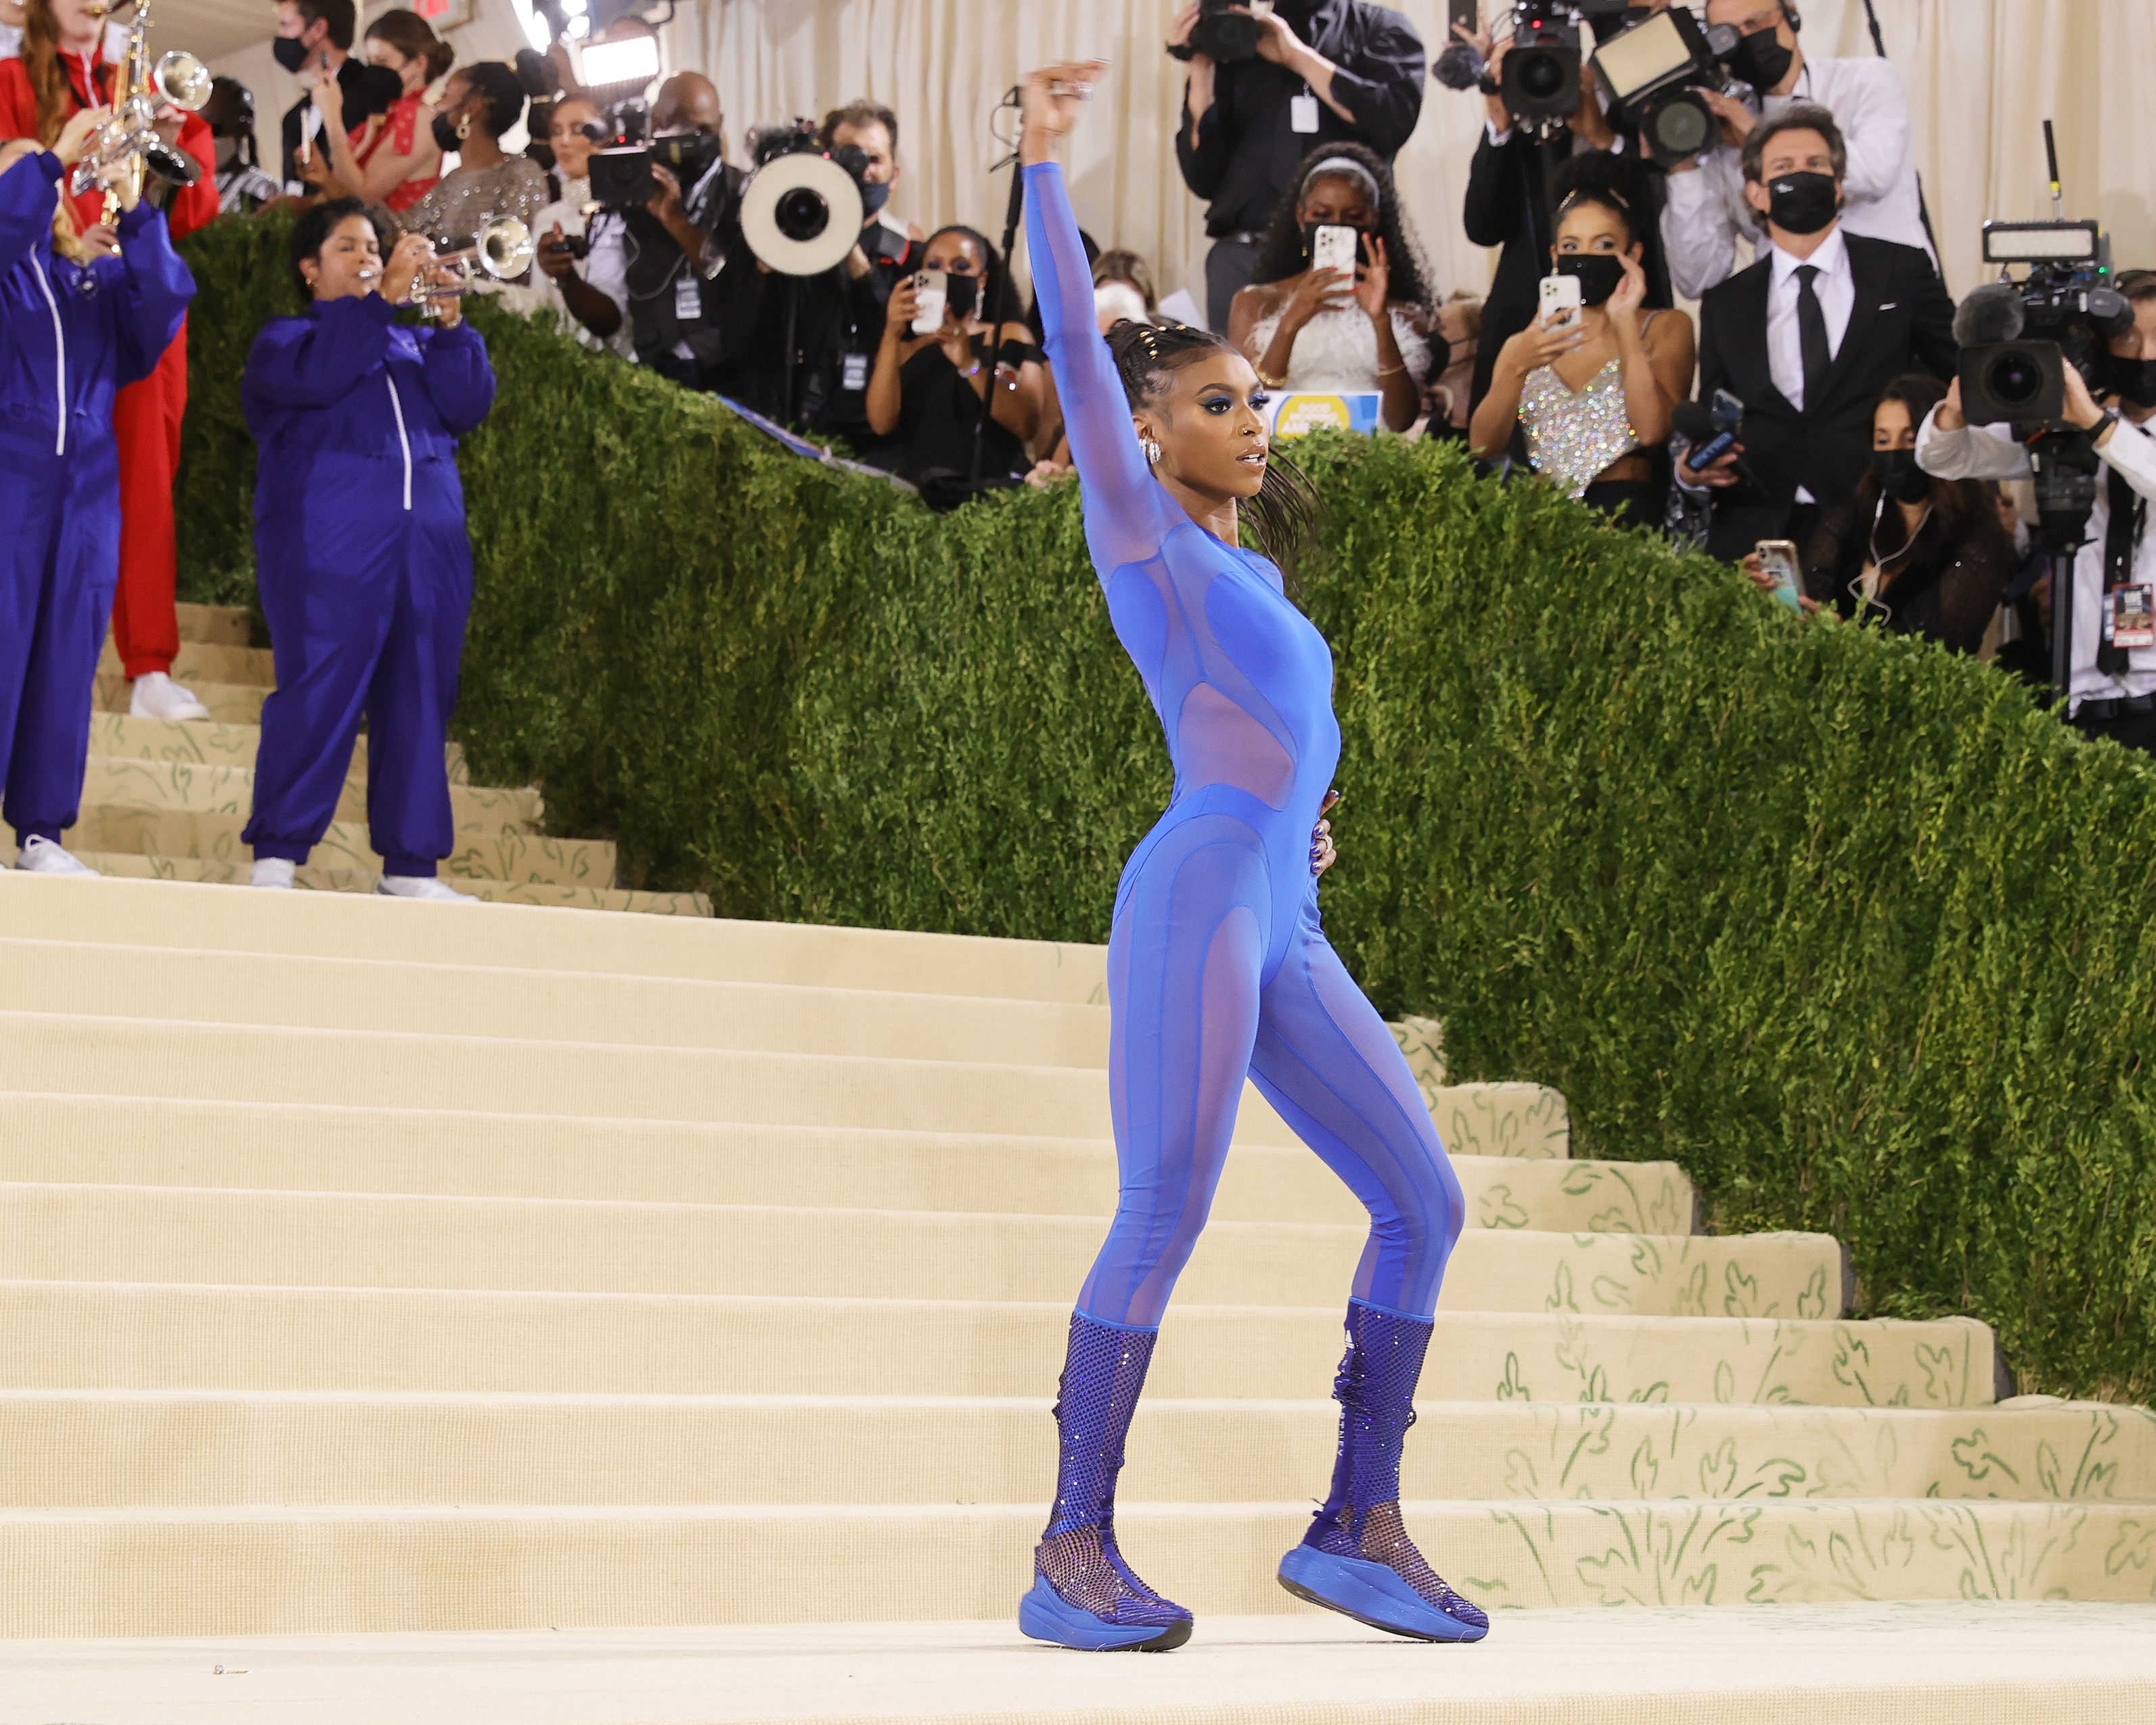 Virgil Abloh attends The 2021 Met Gala Celebrating In America: A News  Photo - Getty Images